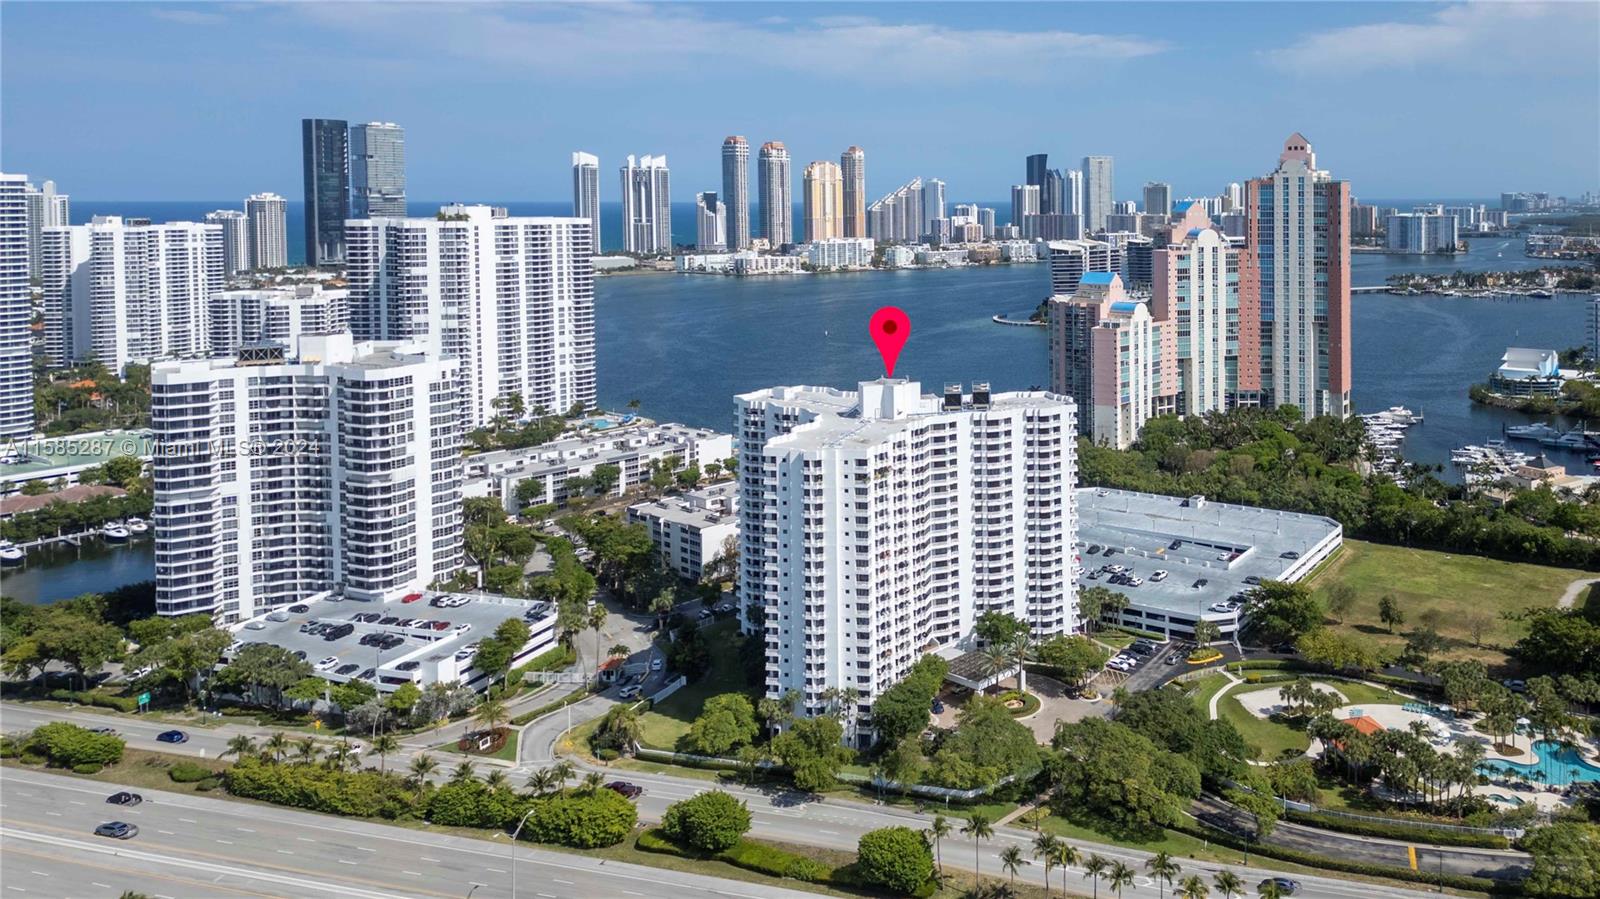 Investor's dream unit in Parc Central Aventura with stunning views of Turnberry Golf Course. Prime location just minutes from the beach and Aventura Mall. Features 2 bedrooms, 2 bathrooms, granite countertops, 24-hour security, pool, gym, valet parking, and more. Ideal blend of luxury and convenience.